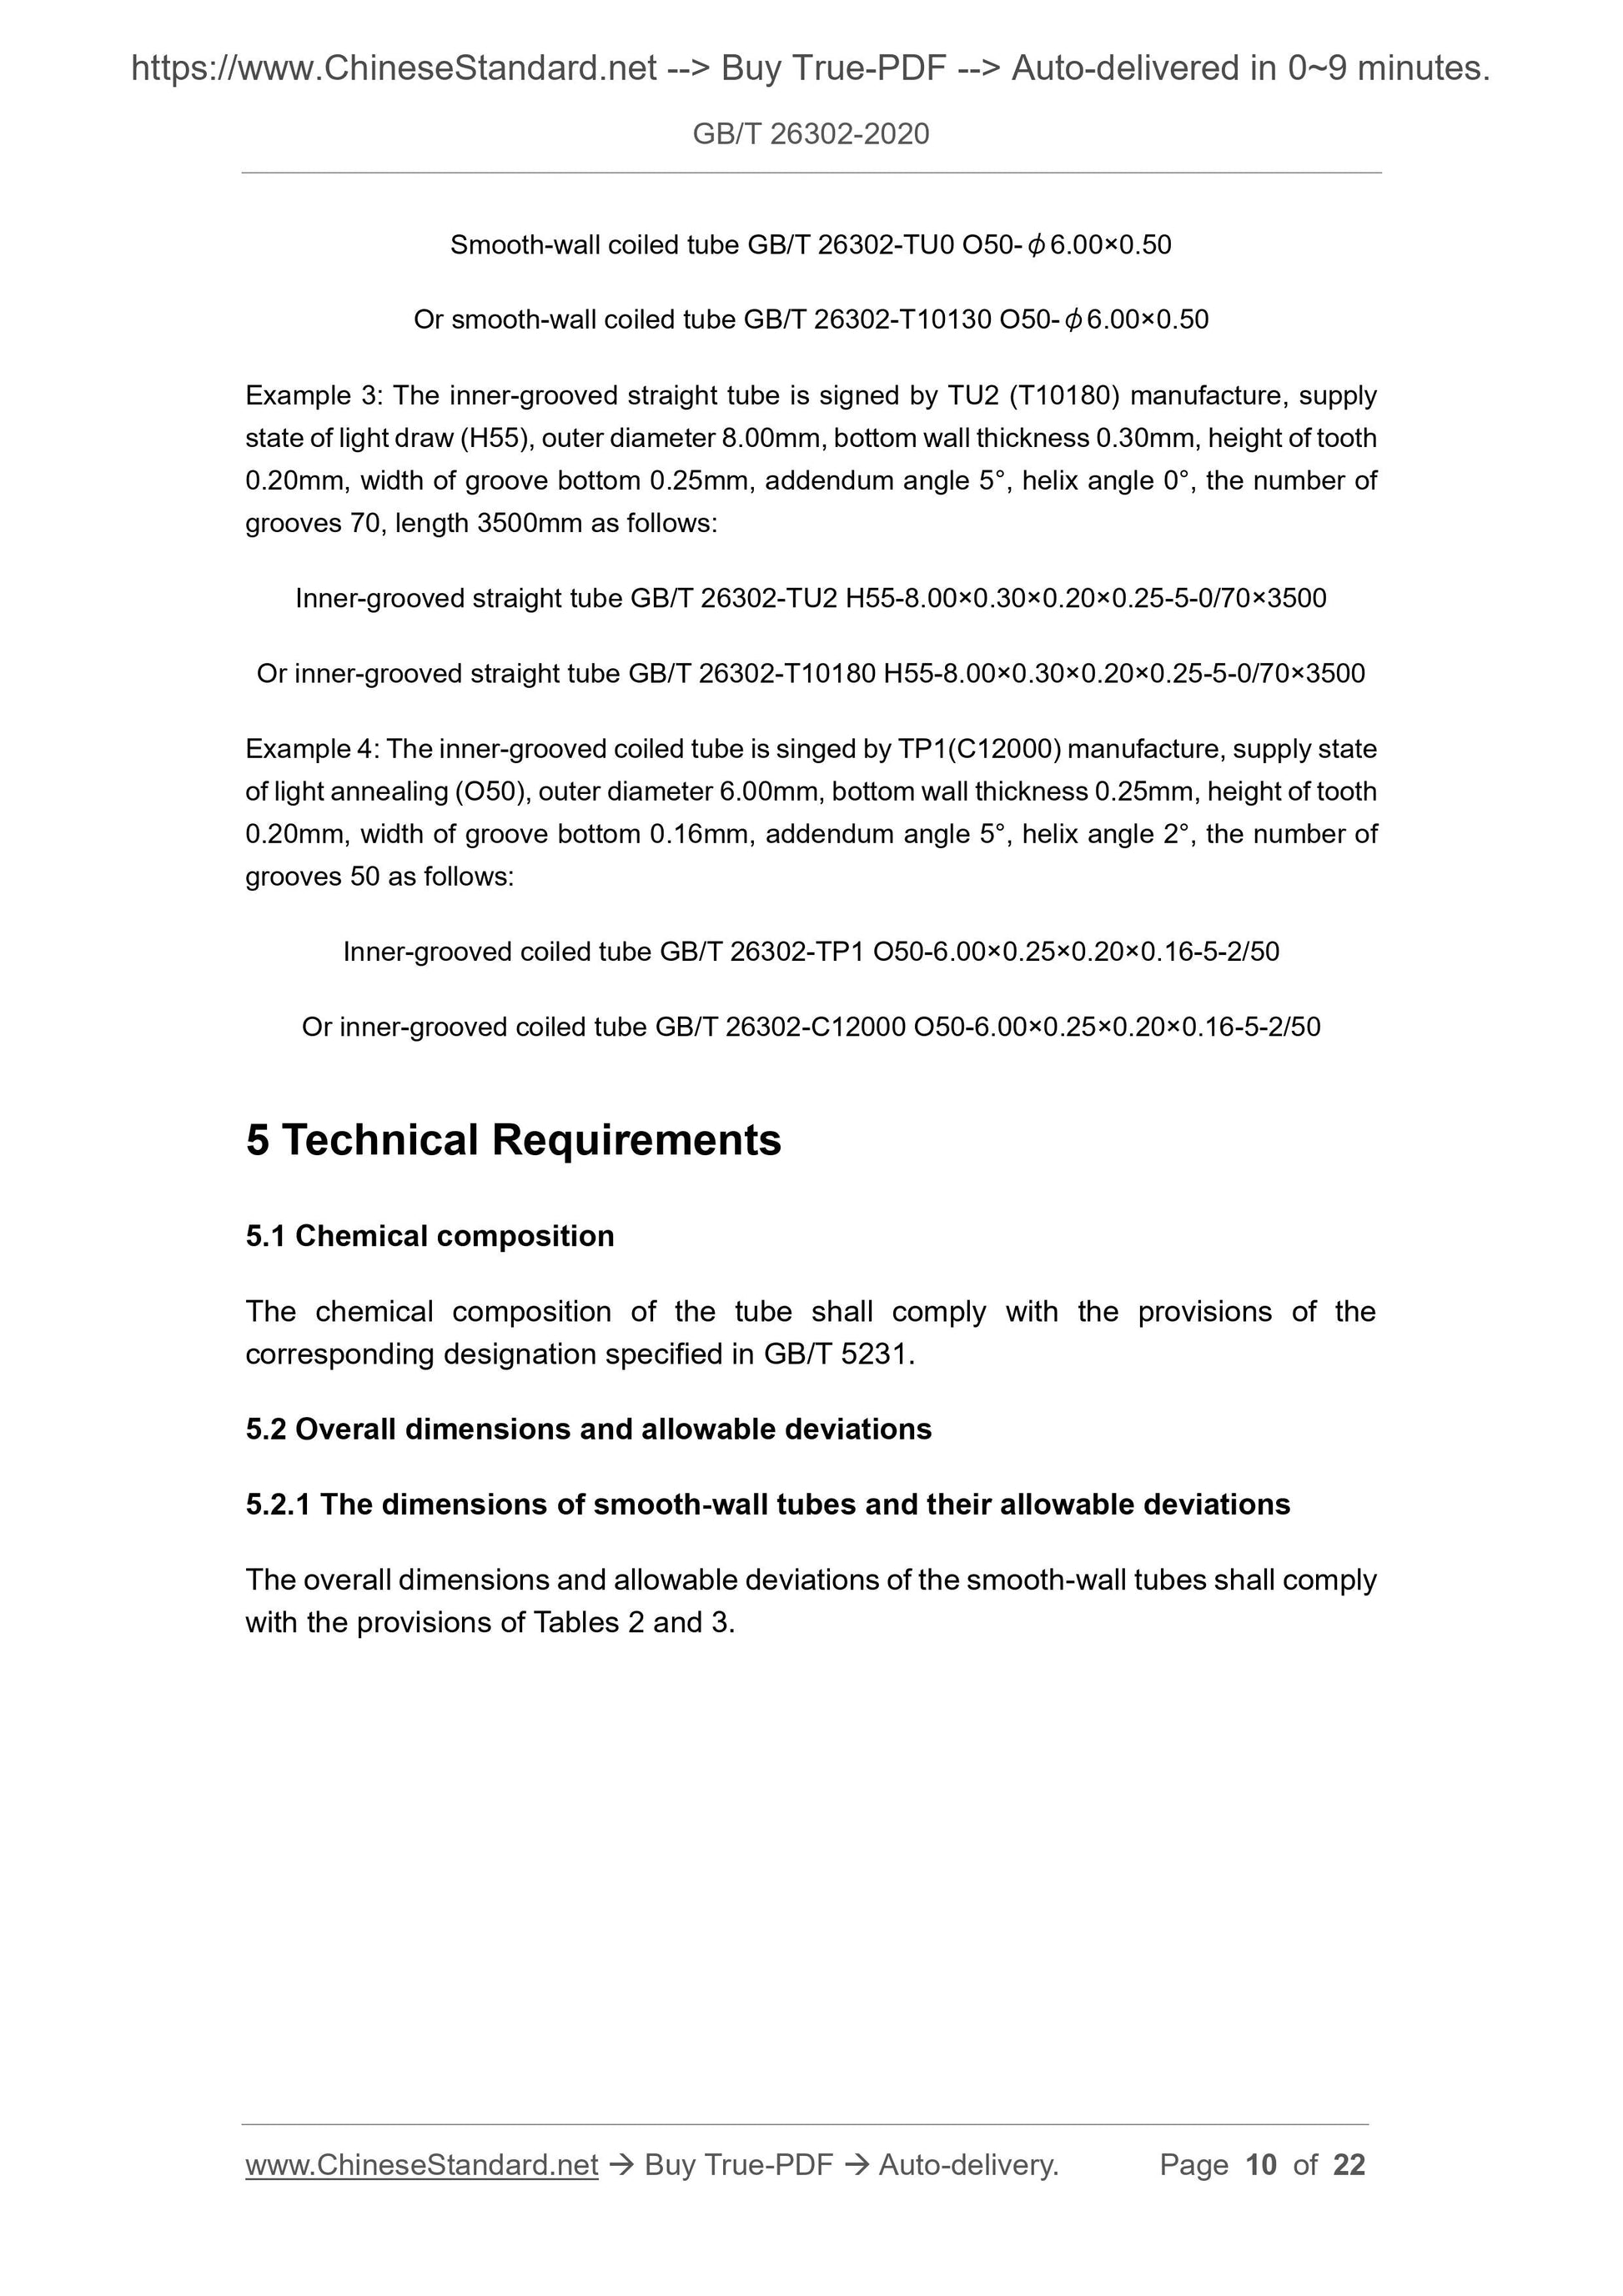 GB/T 26302-2020 Page 5